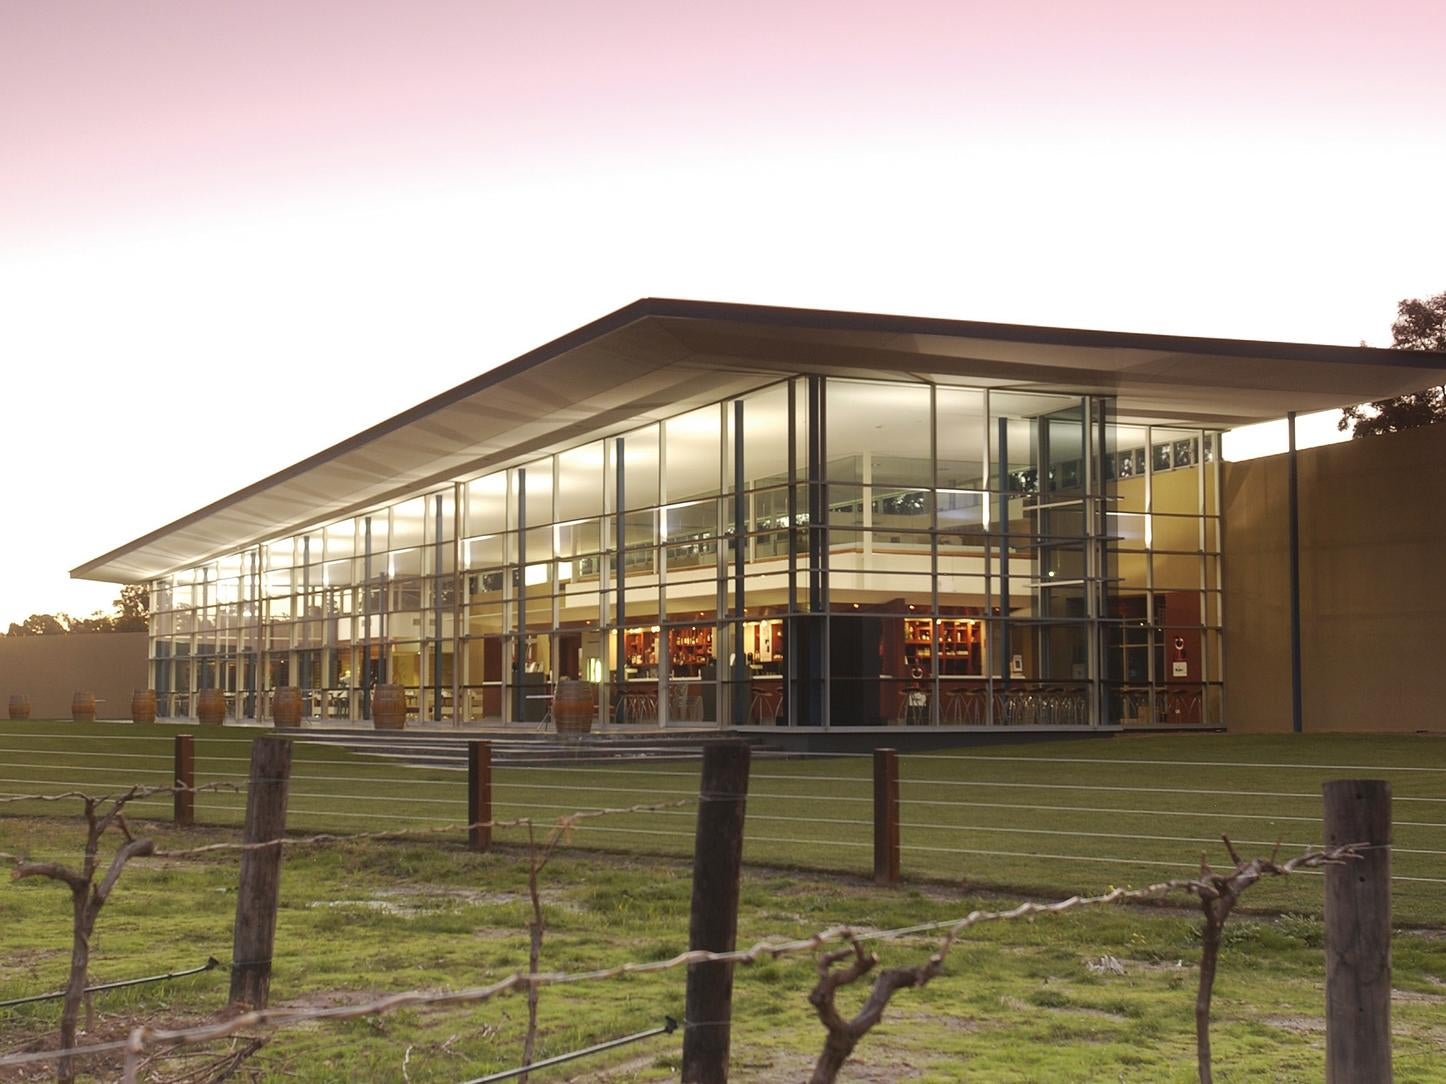 Jacob's Creek Visitor Centre located in the Barossa Valley, South Australia.